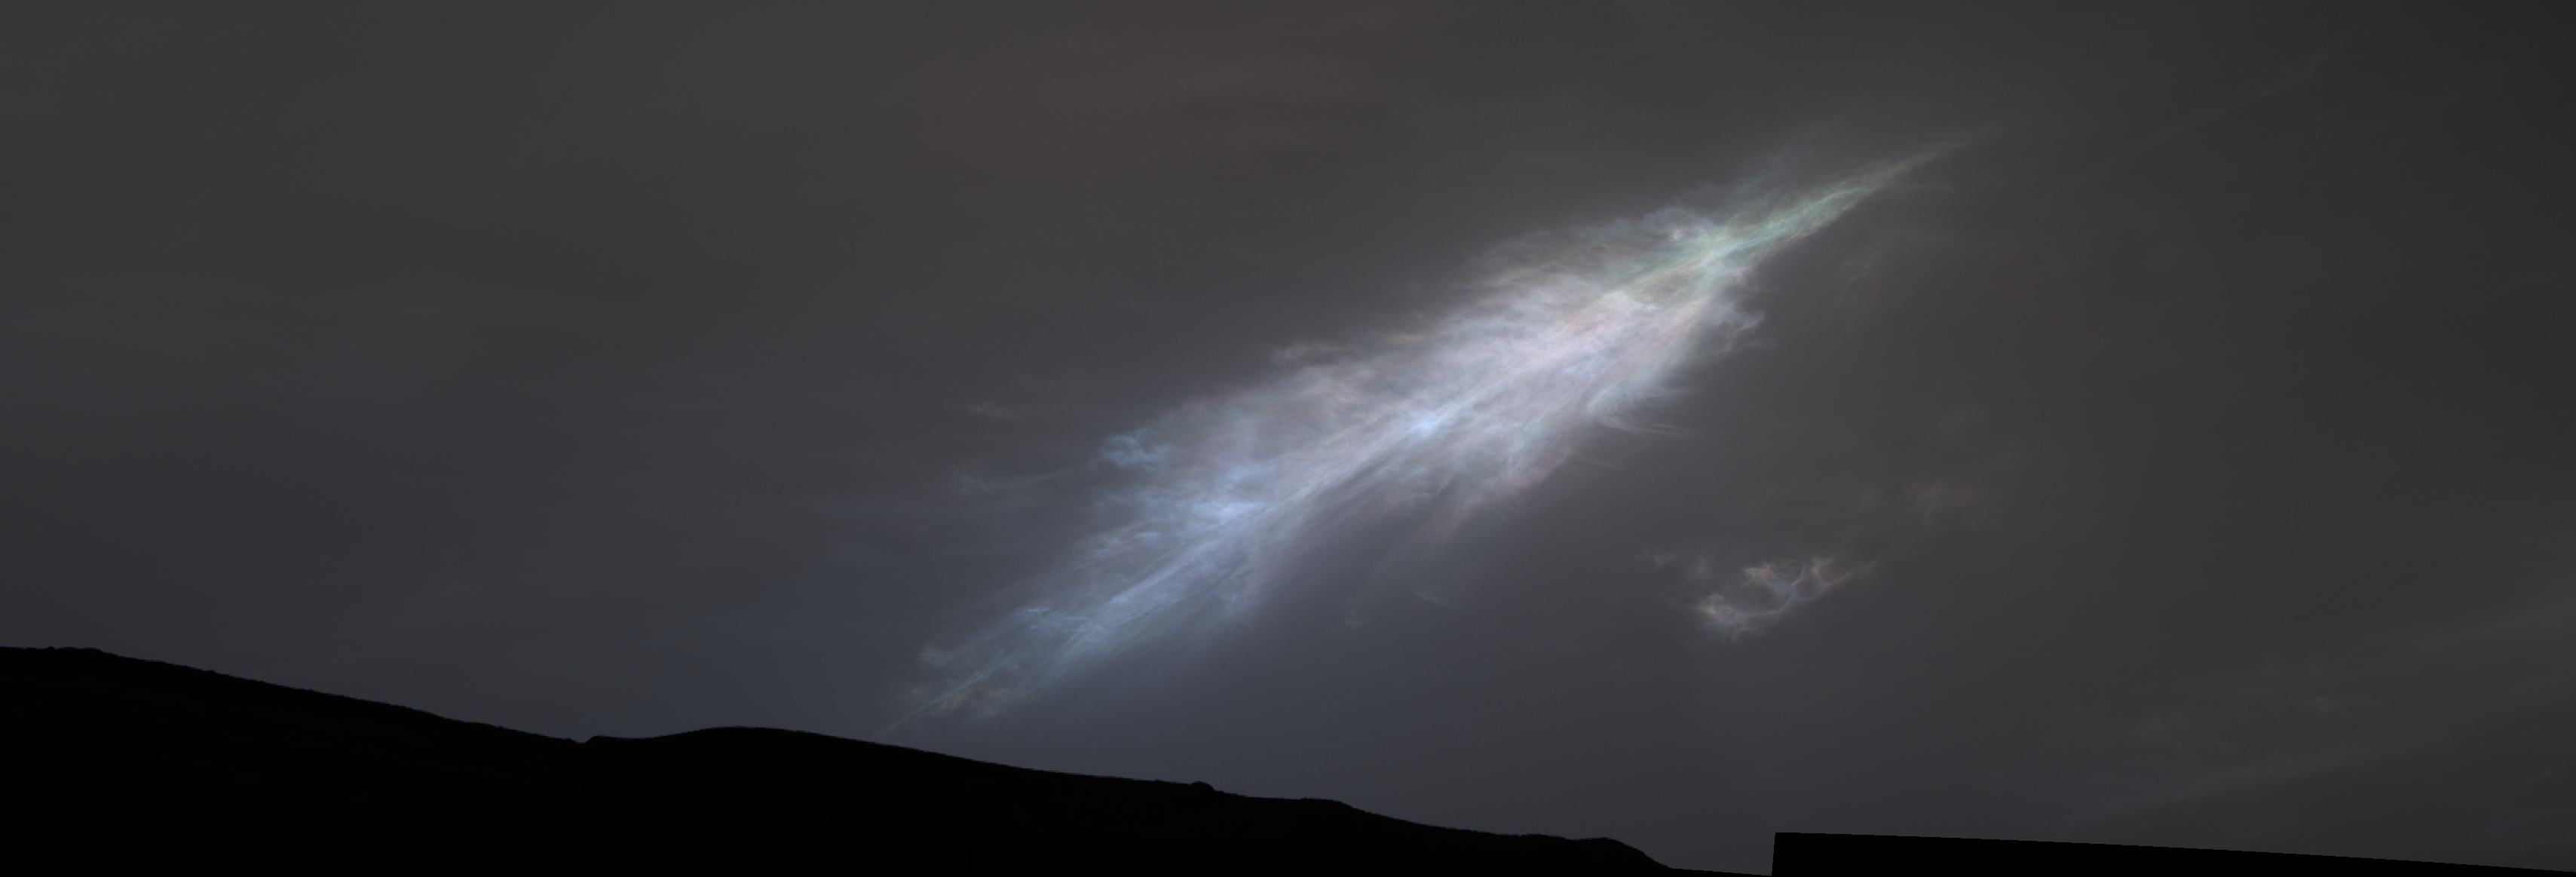 A feather-shaped iridescent cloud just after sunset on Mars.